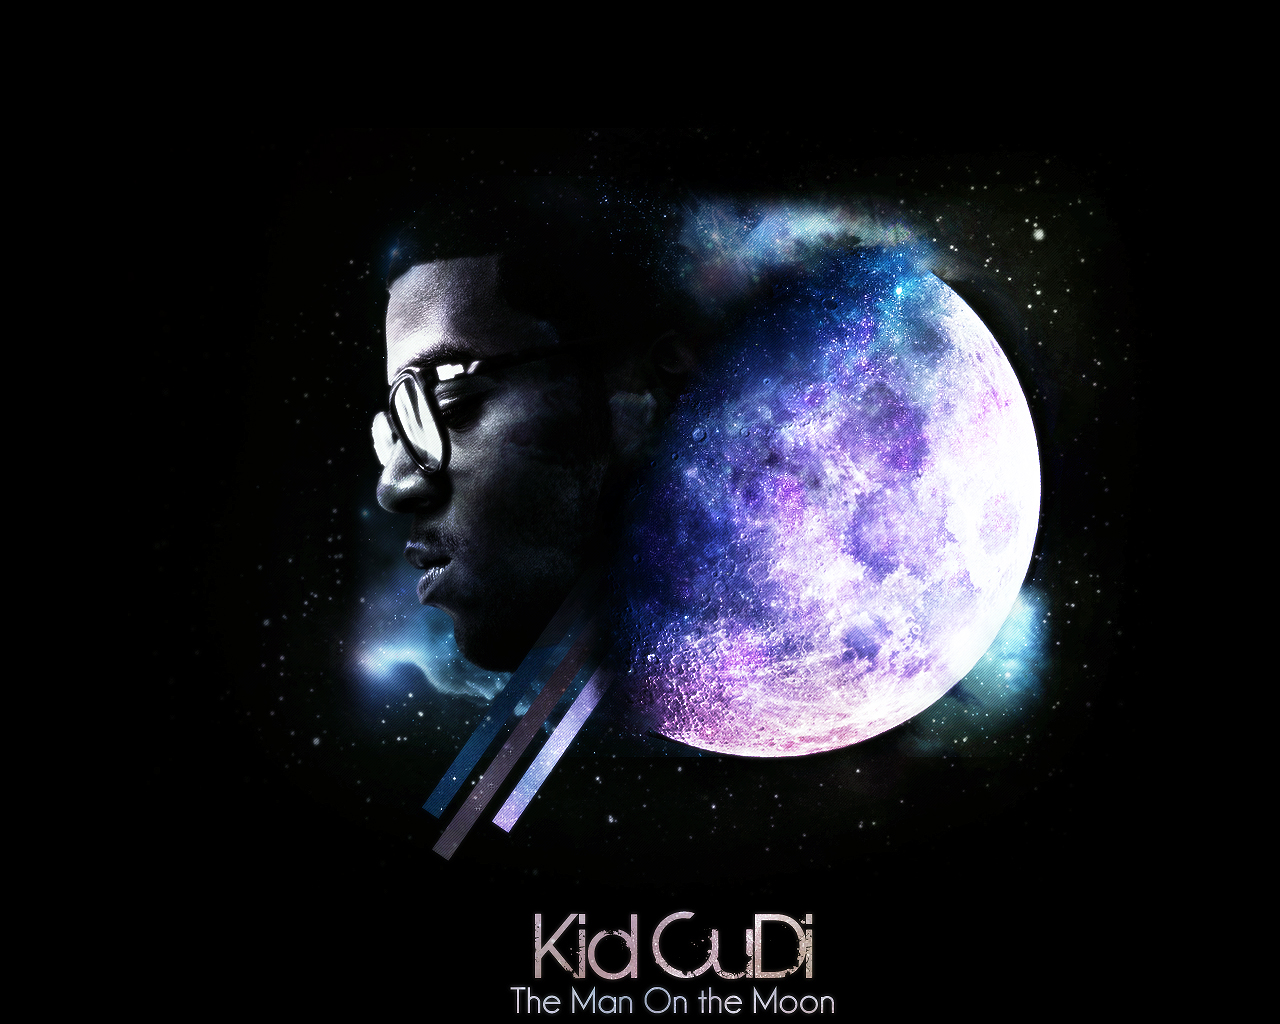 Man On The Moon Kid Cudi Wallpaper The man on the moon by